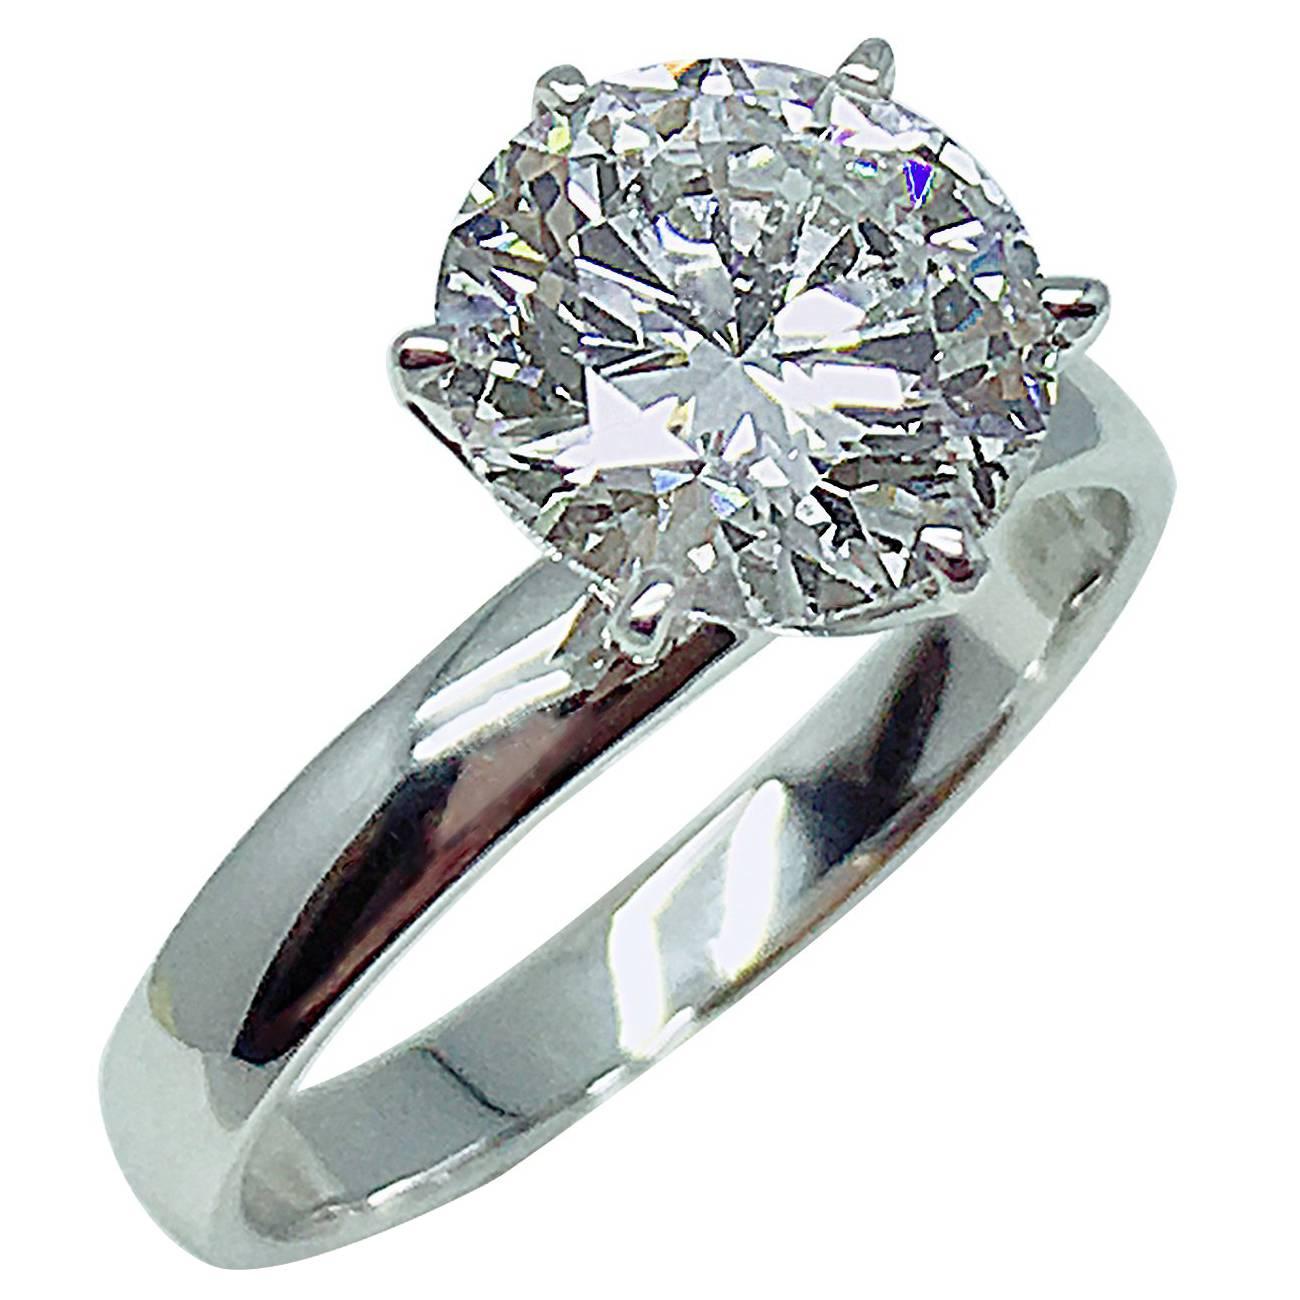 GILIN GIA Certified 2.01 Carat Round Brilliant Diamond Solitaire Engagement Ring